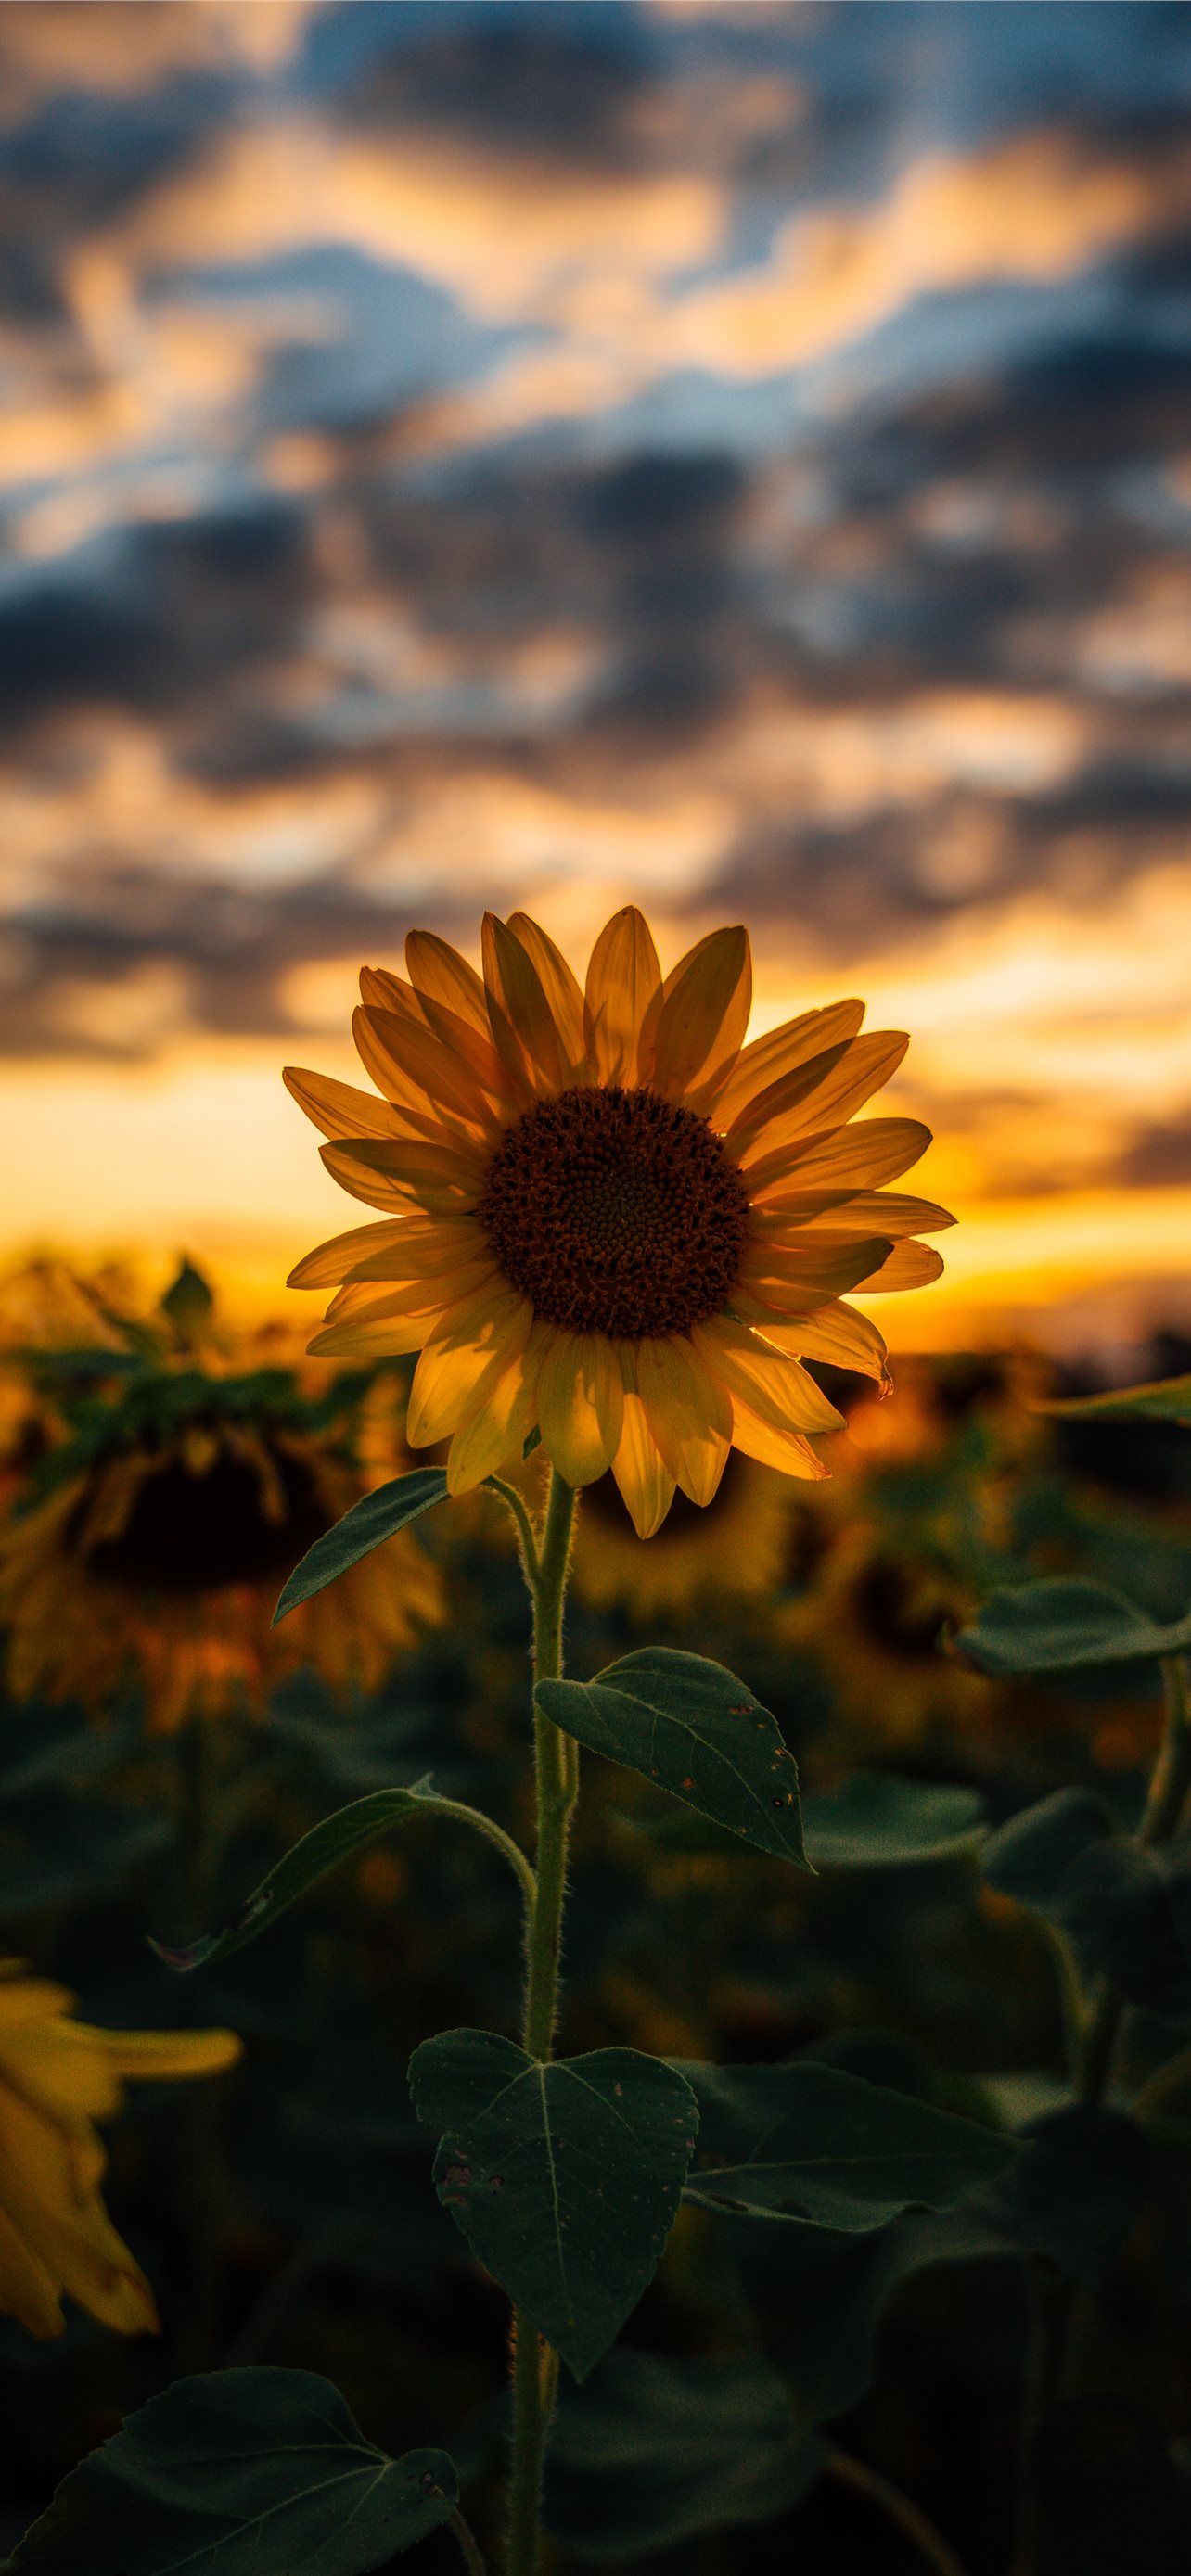 A sunflower is standing in the middle of some other flowers - Photography